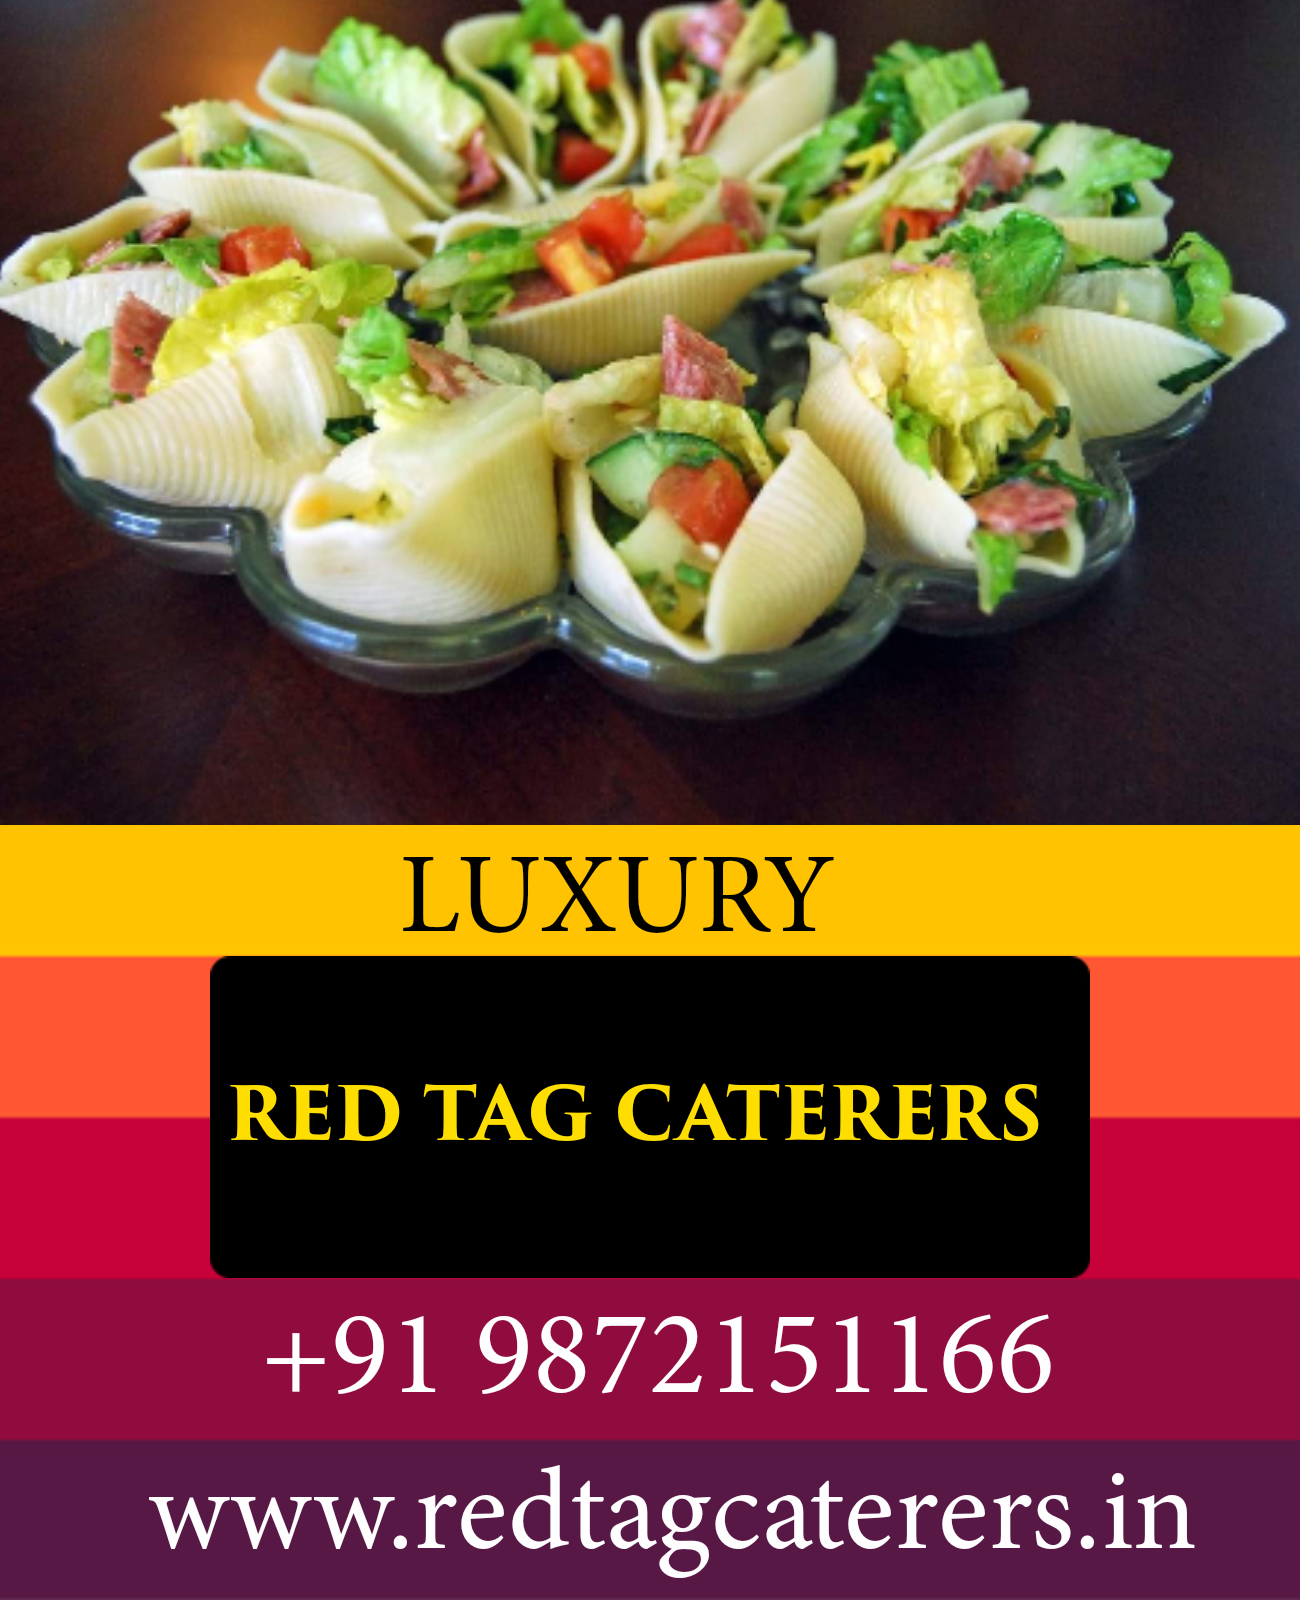 Best caterers in Ludhiana  | Red Tag Caterers | Best caterers in Ludhiana, best caterers in Ludhiana, best caterers in Ludhiana, best caterers in Ludhiana, best caterers in Ludhiana, best caterers in Ludhiana  - GL44407